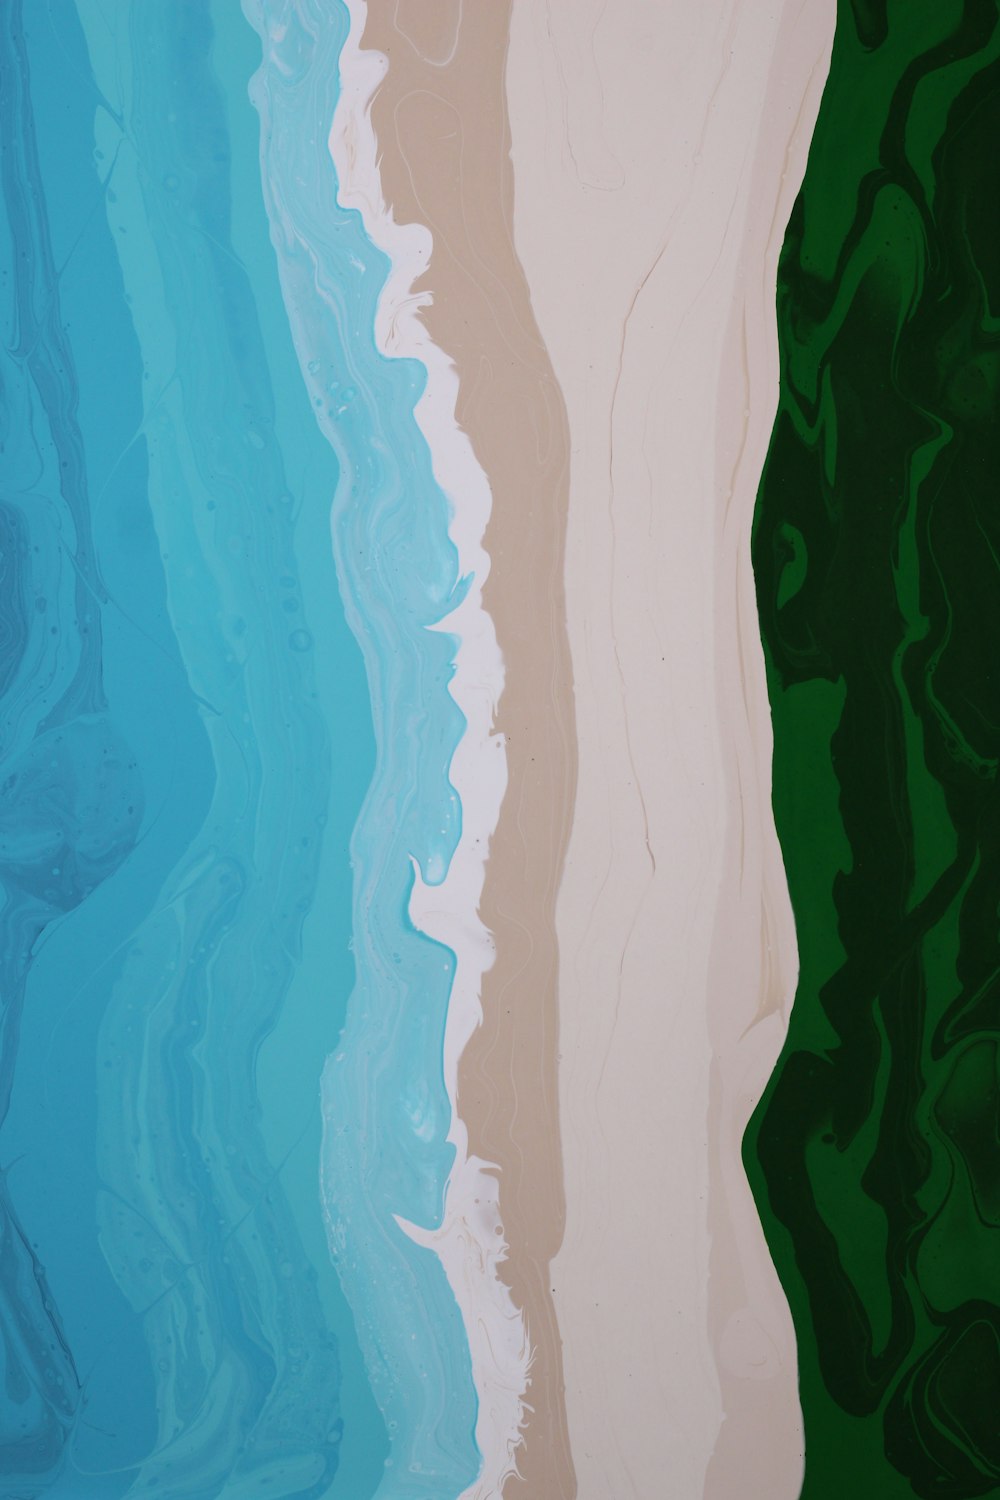 a painting of two different colors of water